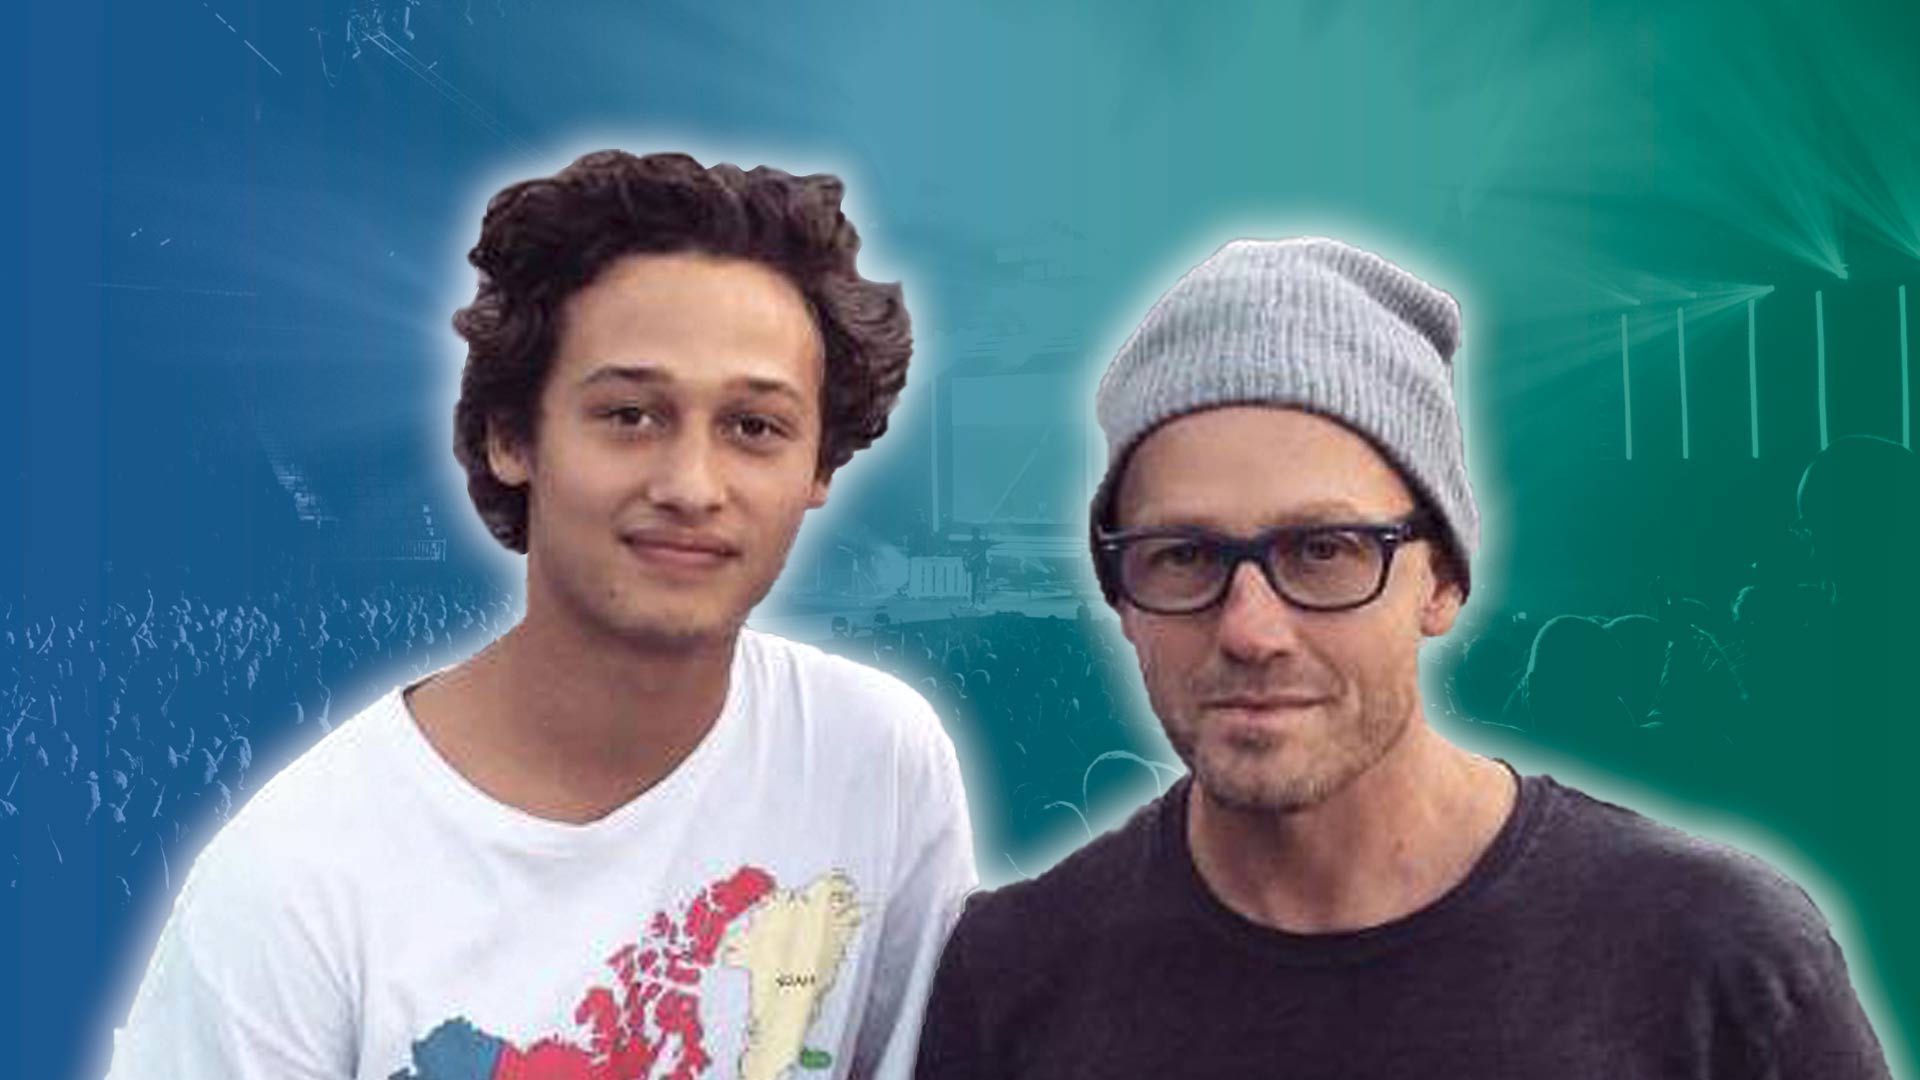 TobyMac Shares Tribute to His Late Son During Concert